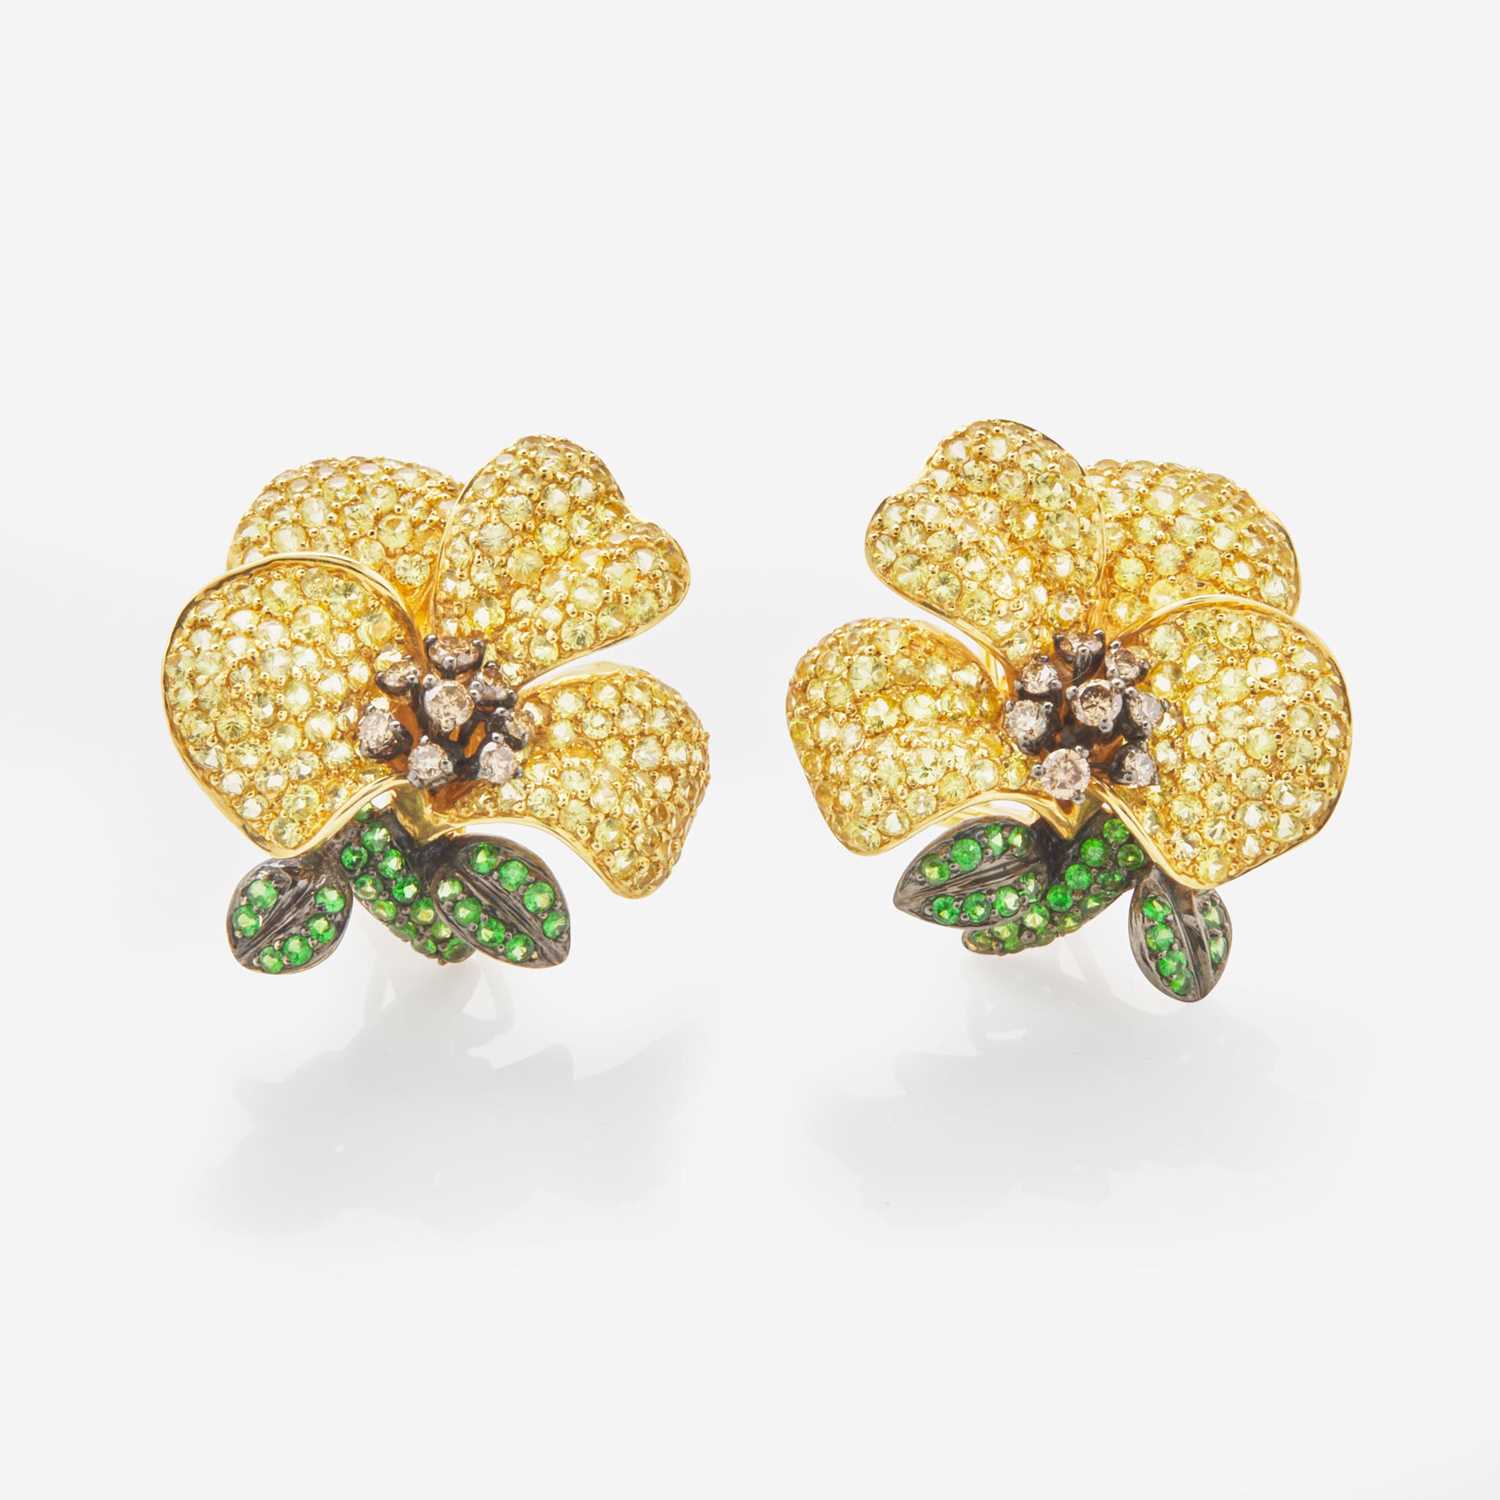 Lot 84 - A Pair of Yellow Topaz, Diamond and Emerald Flower Earrings